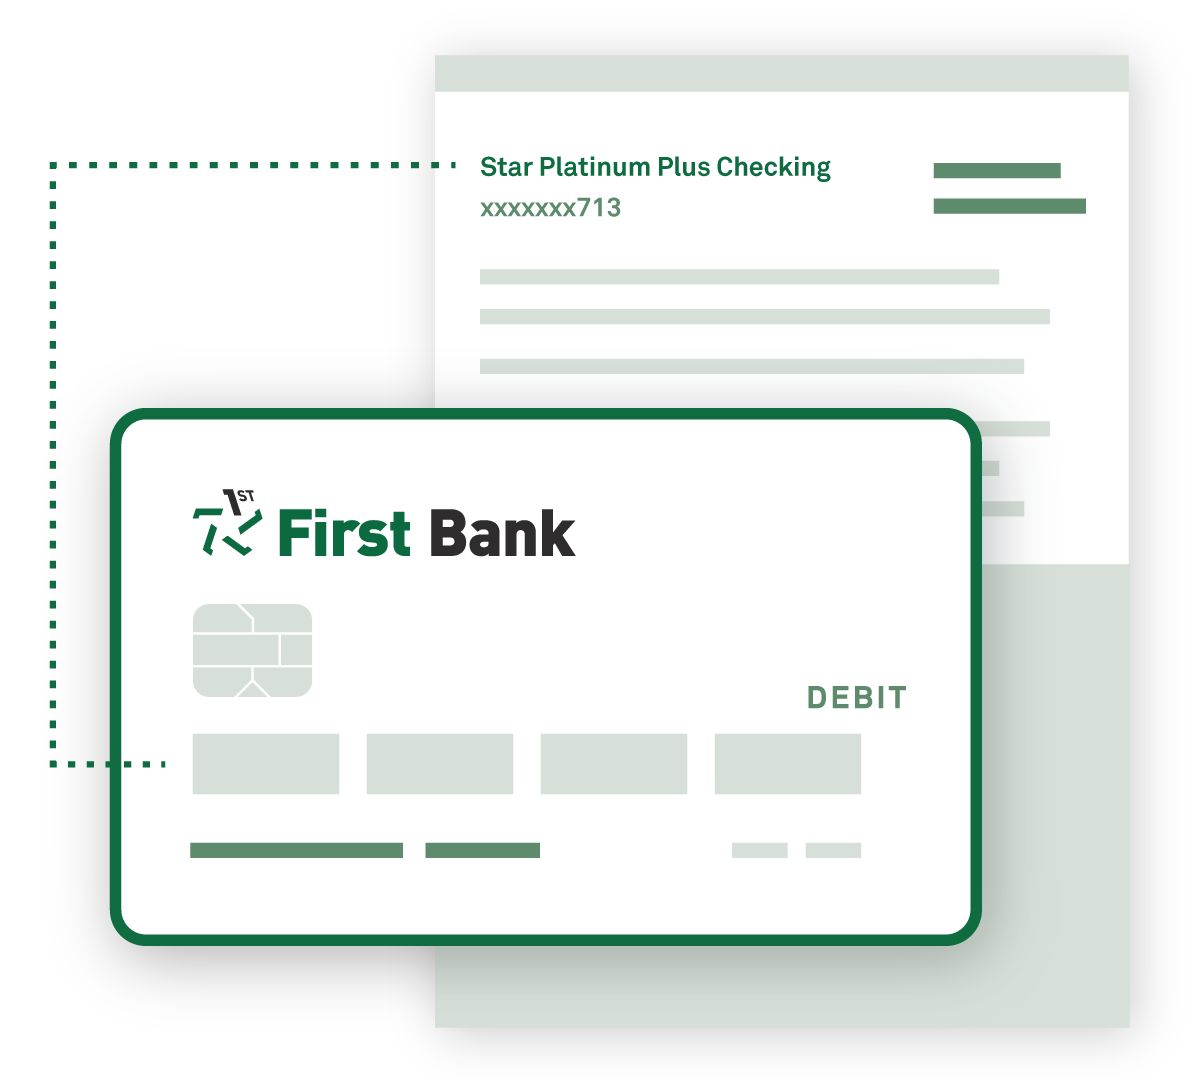 An illustration showing a debit card and account register.